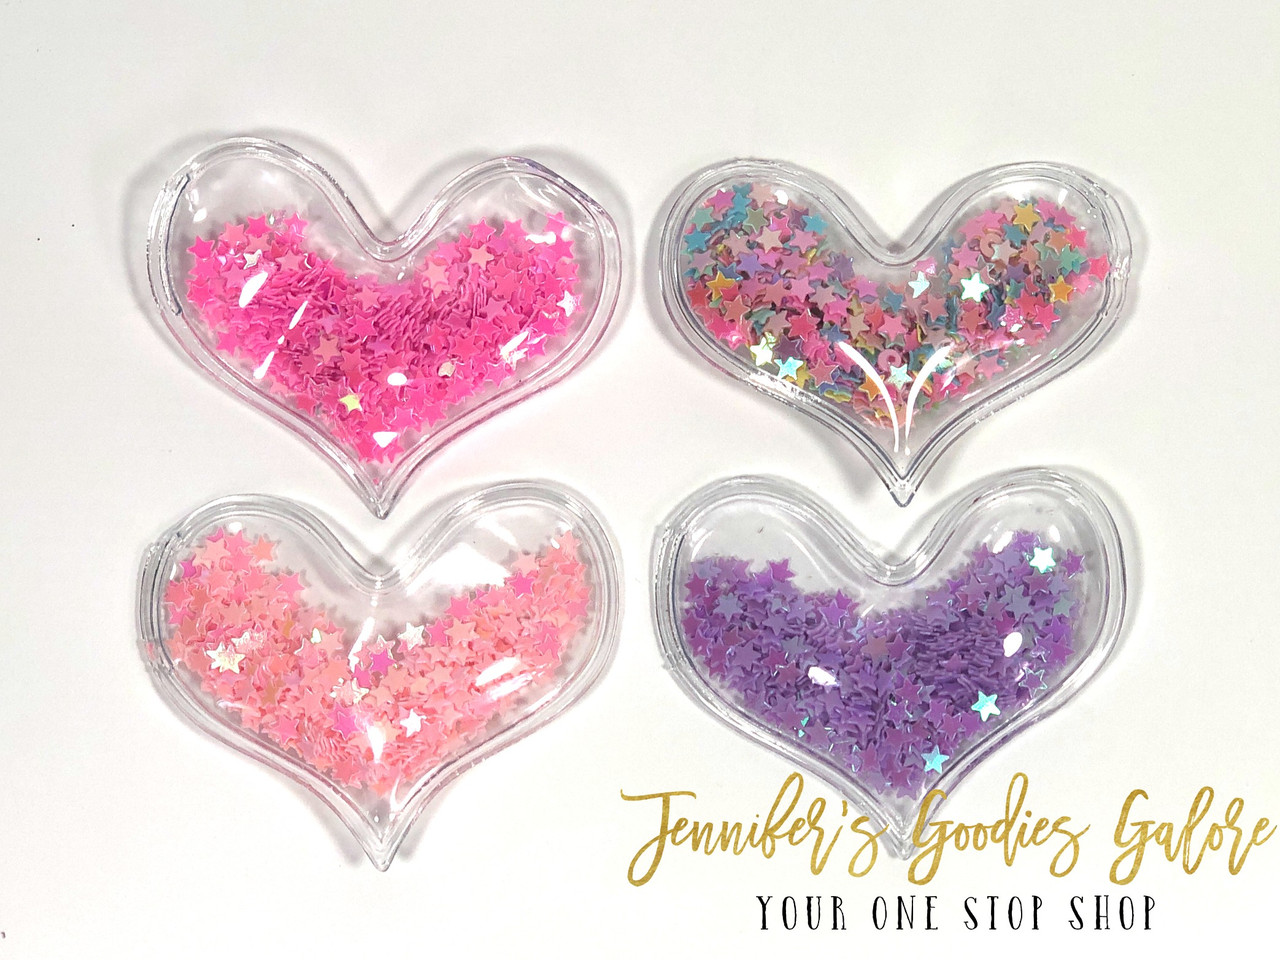 Star Glitter Sparkle Hair Clips For Kids/Accessories/Pins For